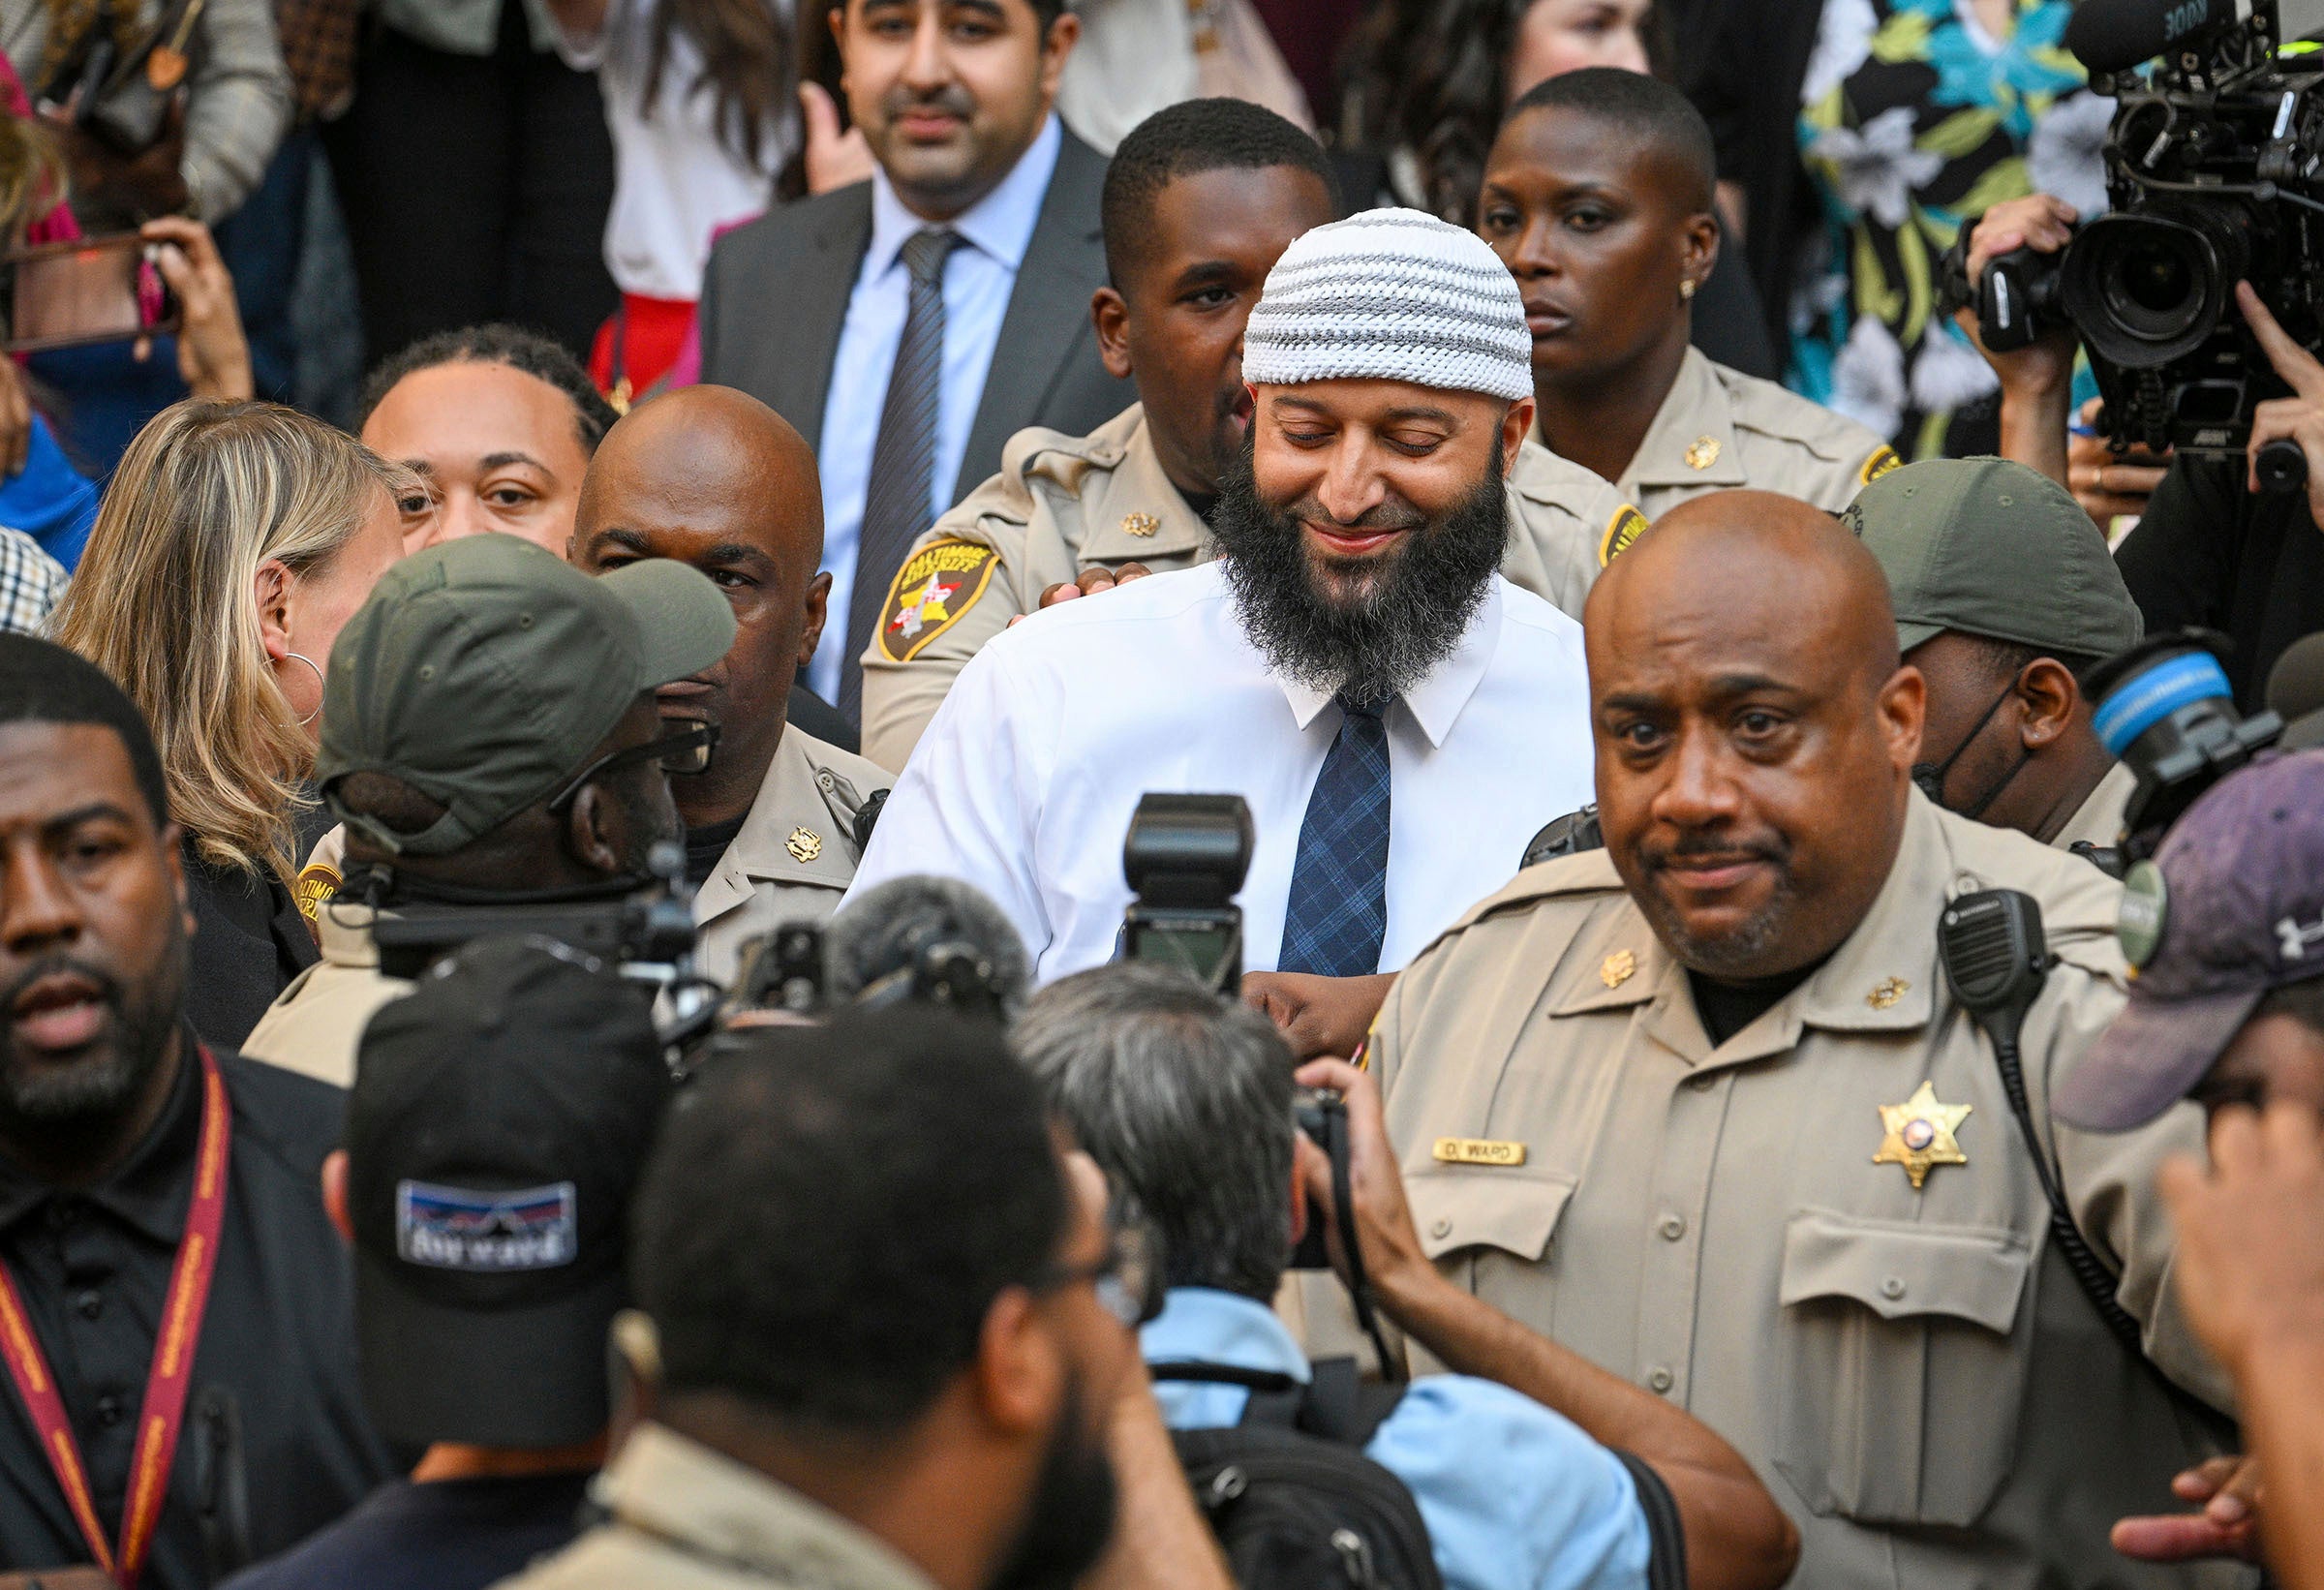 Adnan Syed leaves the courthouse on Monday after his conviction was quashed